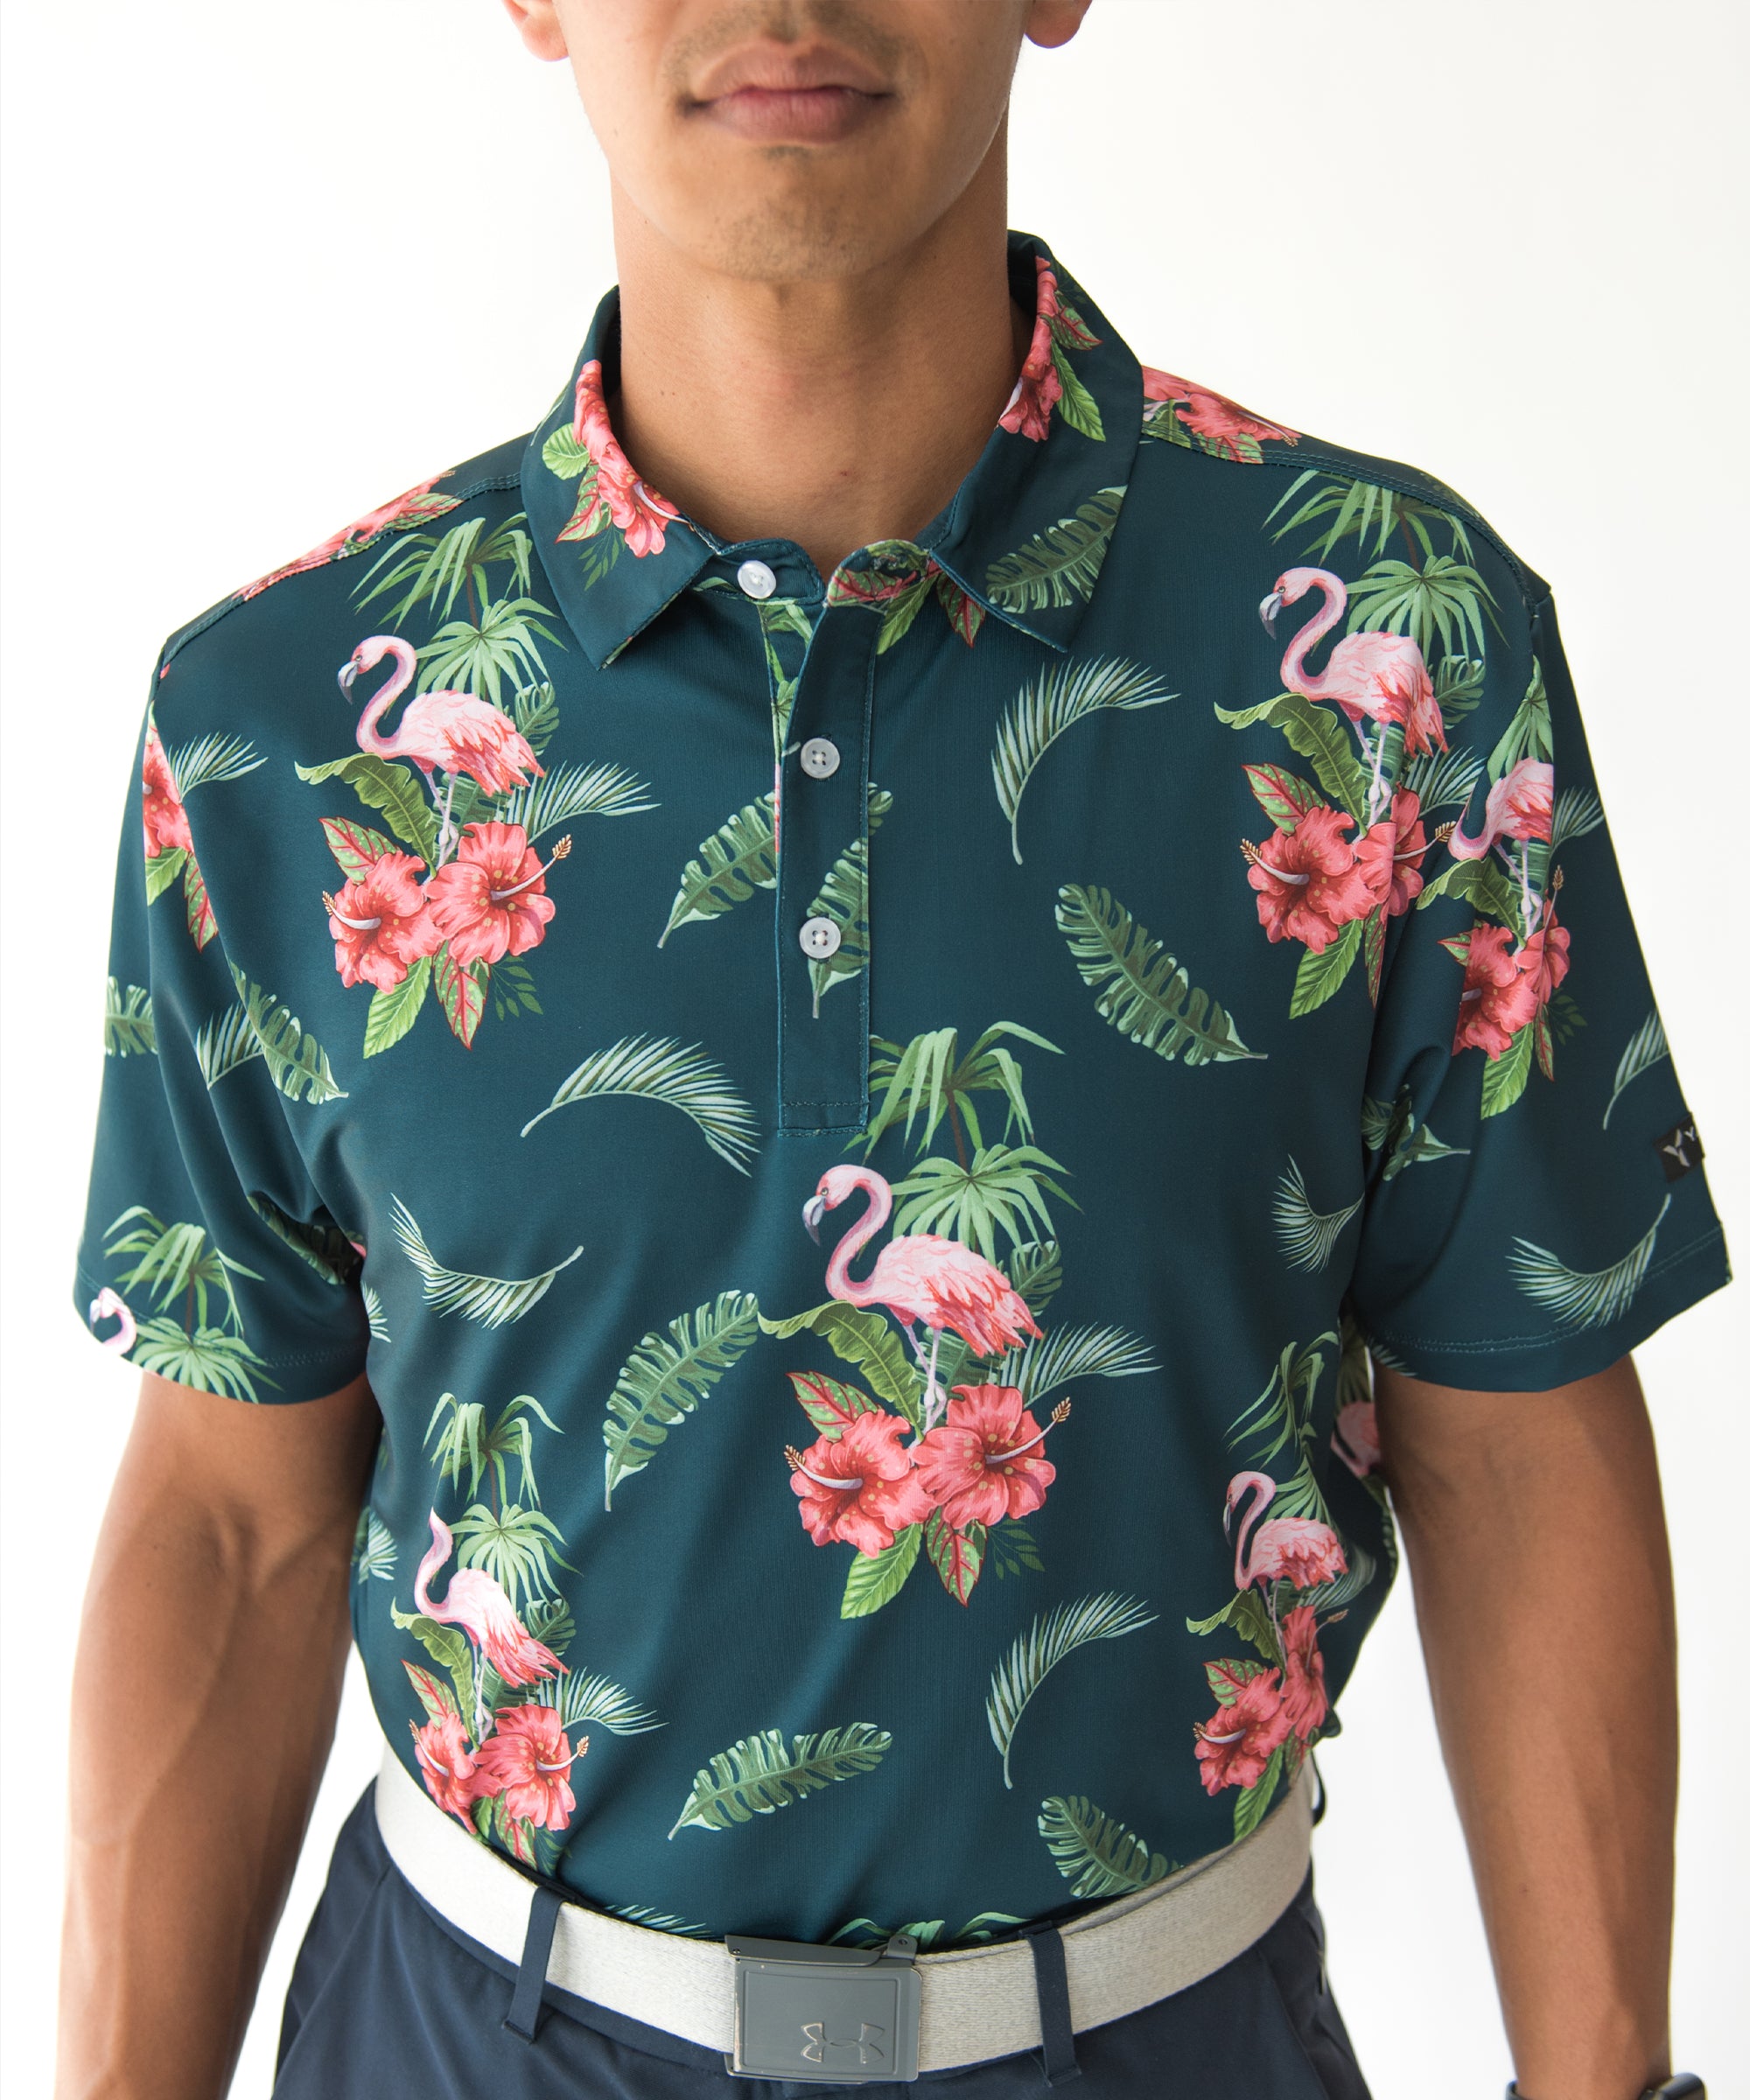 Hawaiian Golf Shirts That Are Breathable and Unique – Yatta Golf